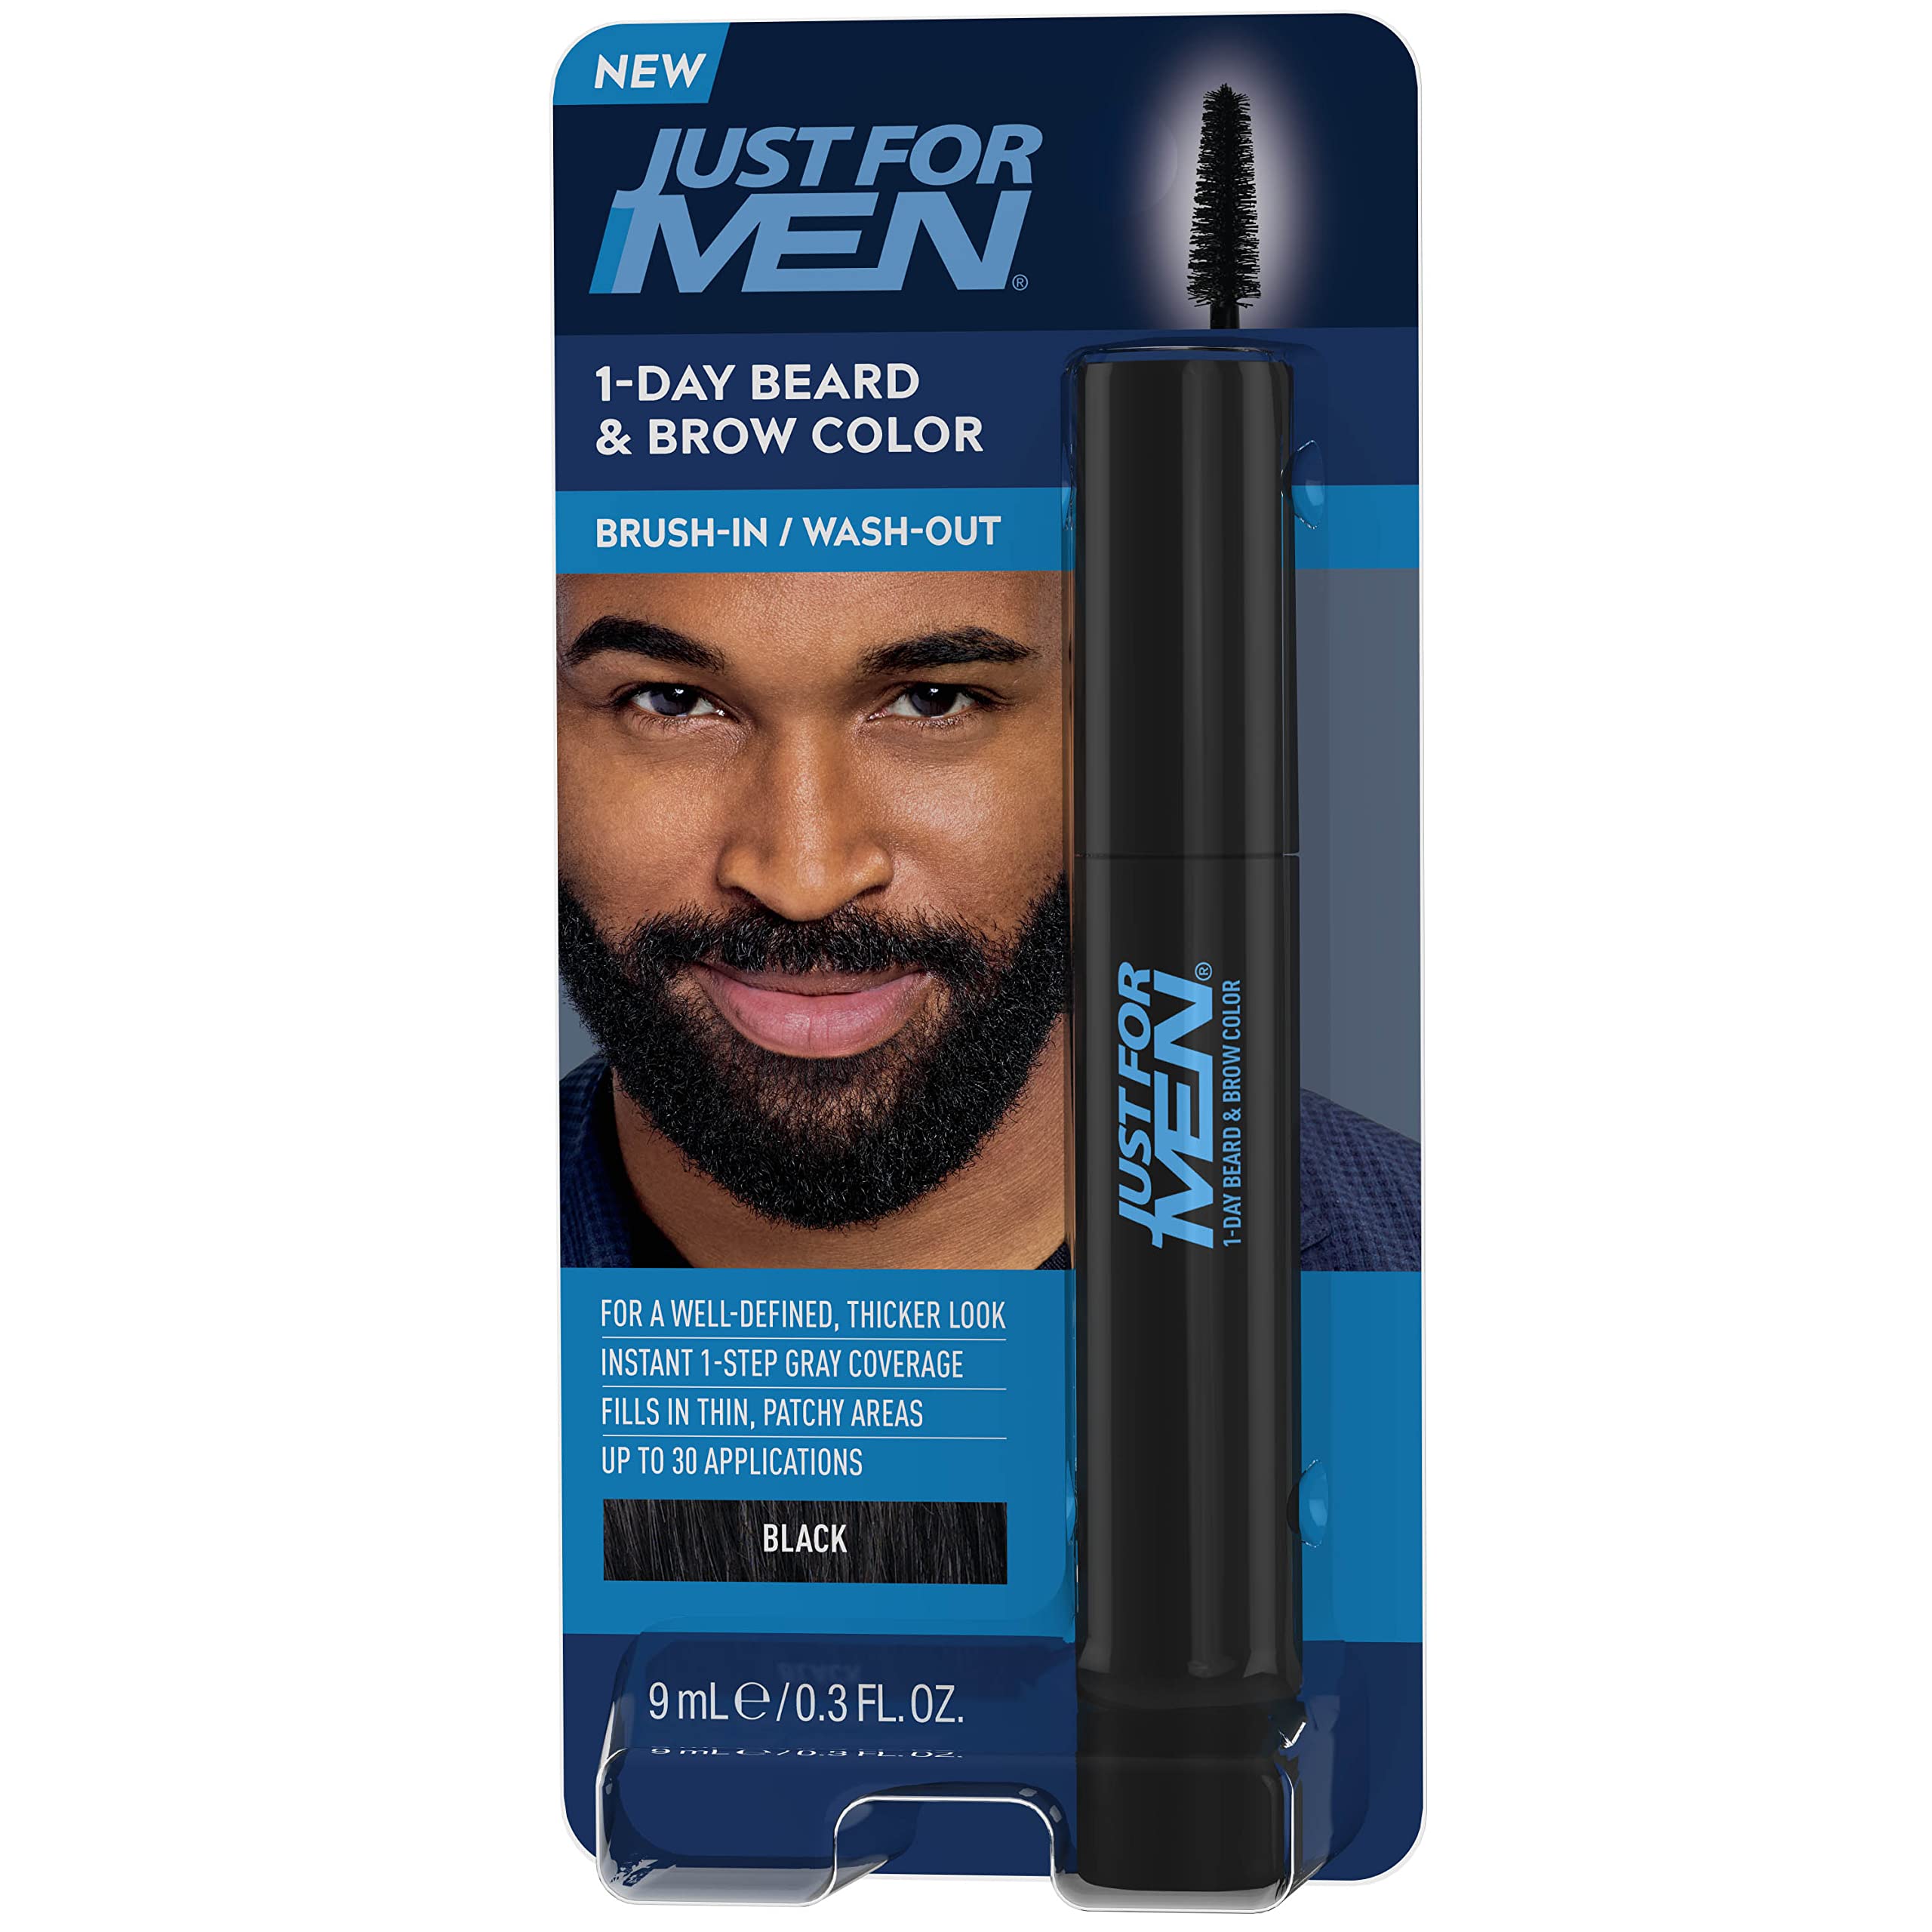 Just for Men 1-Day Beard & Brow Color (Various Colors) $9.50 w/ S&S + Free Shipping w/ Prime or on $35+